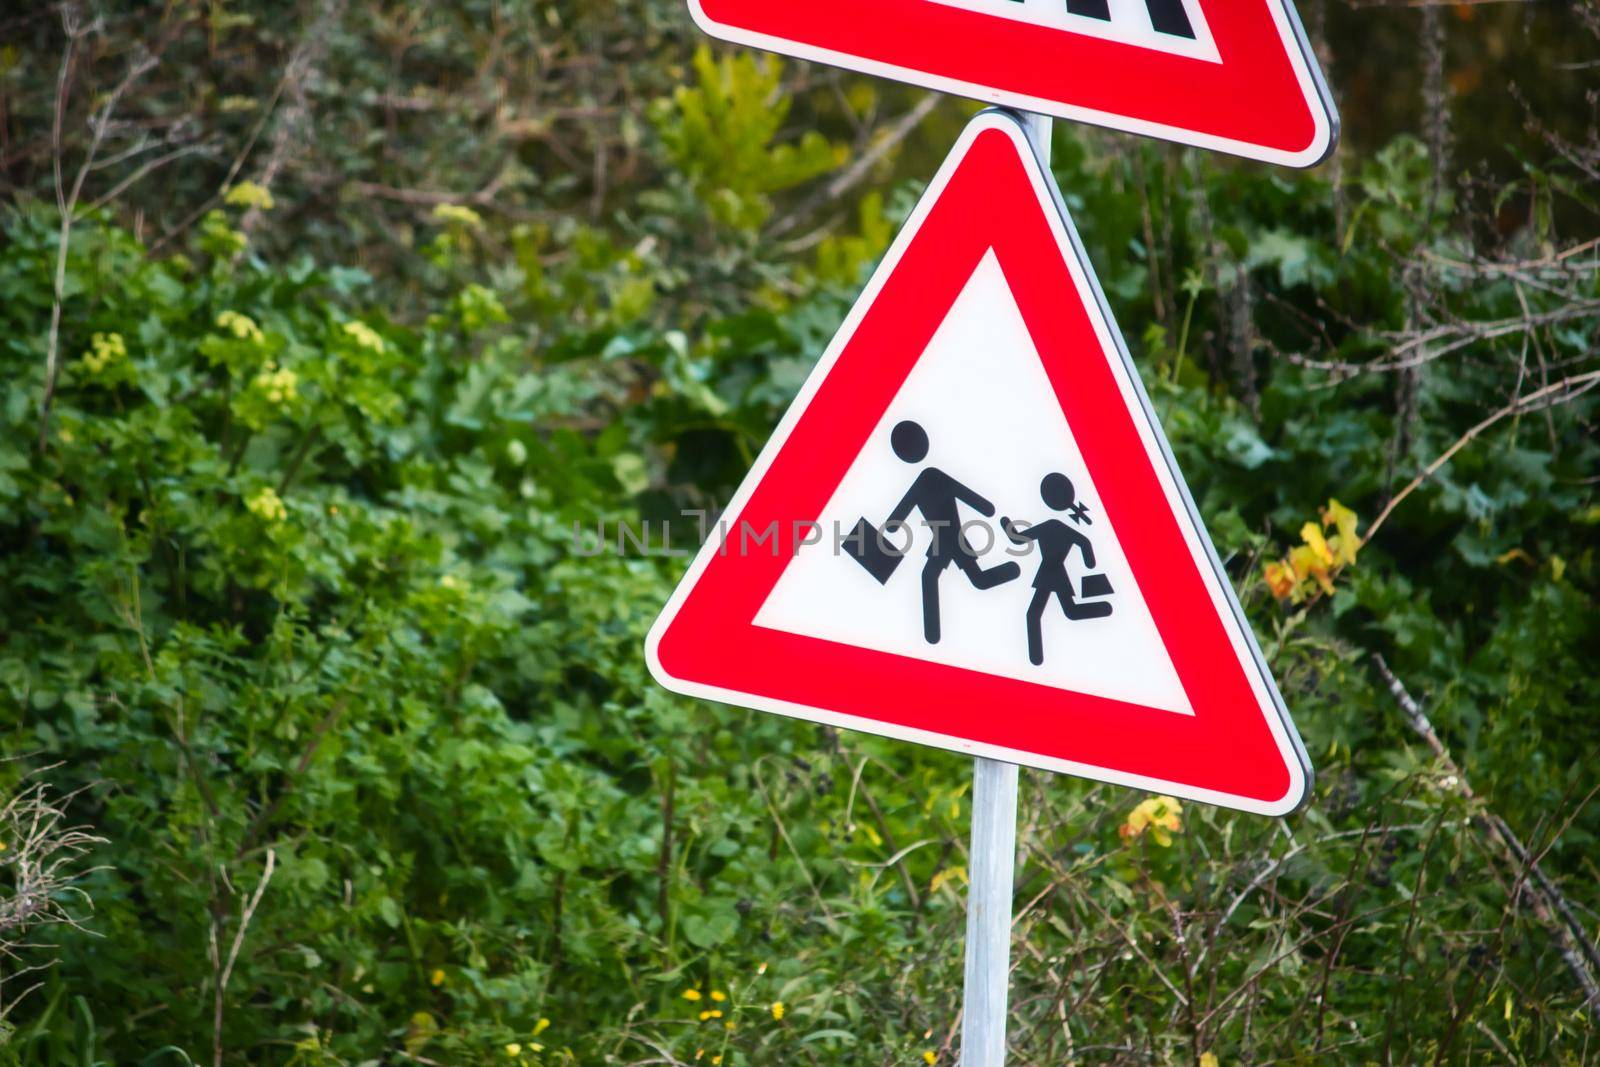 School children crossing sign with trees and plants in the background